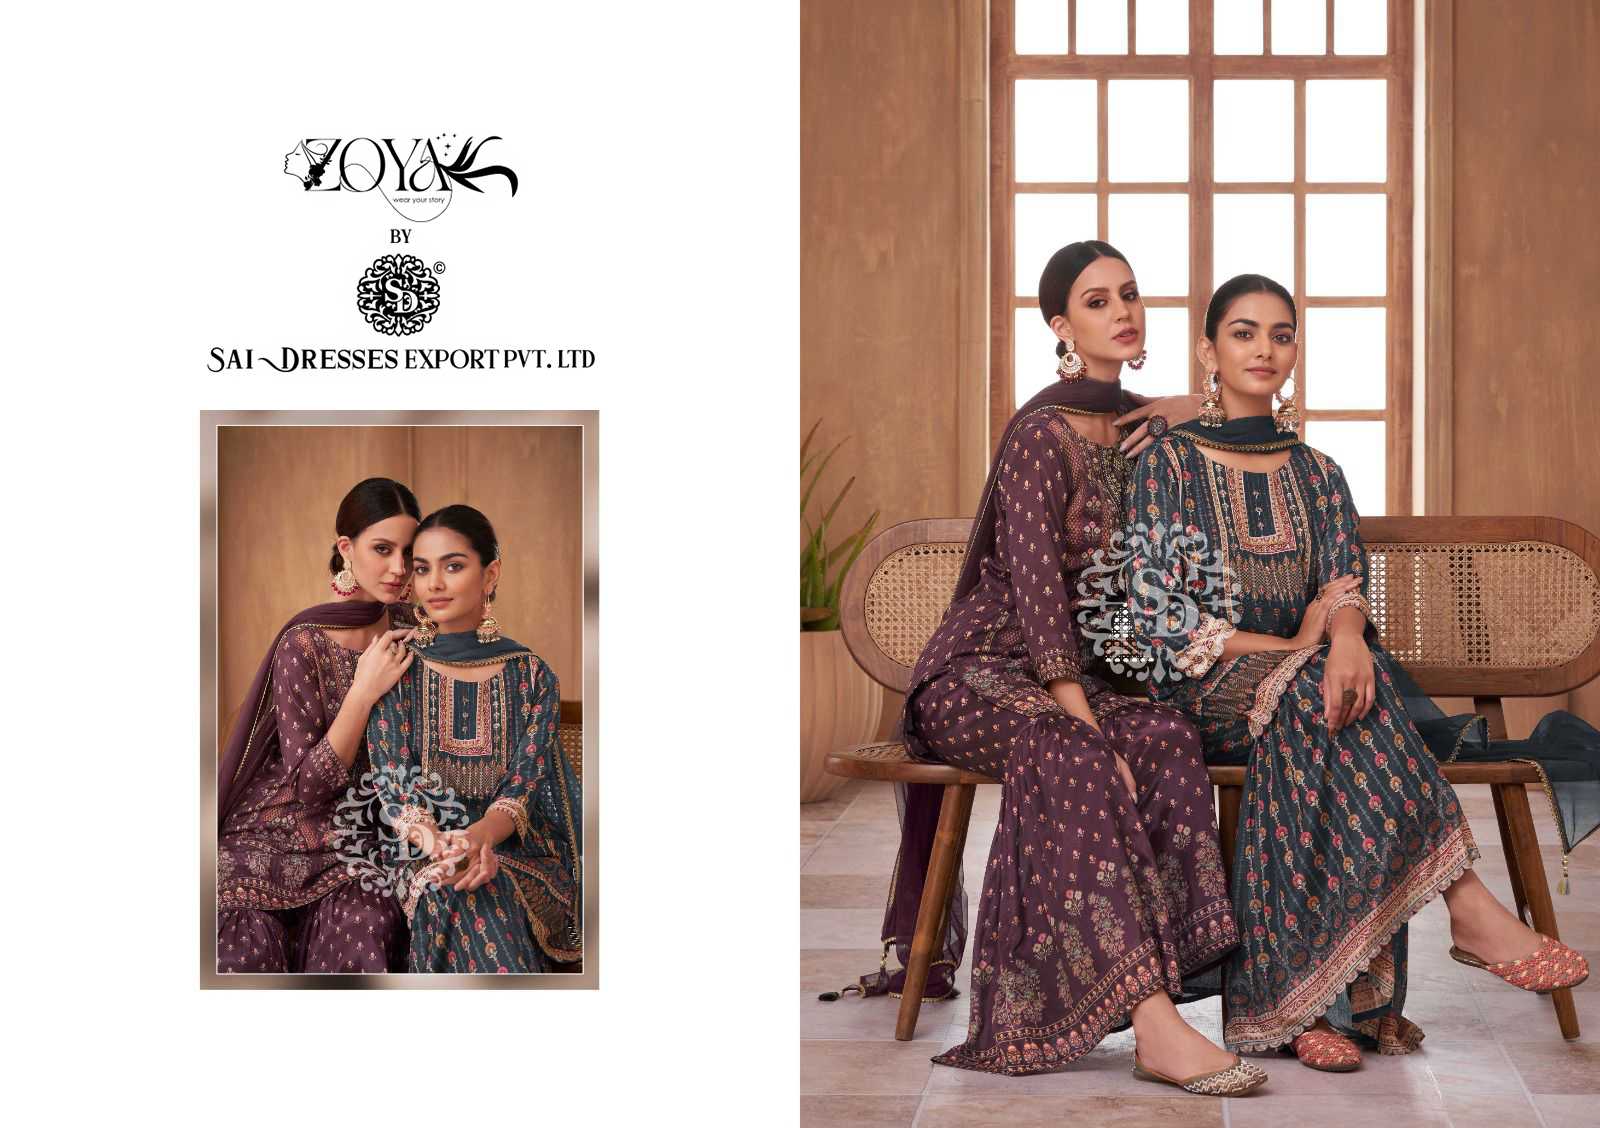 SAI DRESSES PRESENT ISHIKA READY TO FASTIVAL WEAR GARARA STYLE DESIGNER SUITS IN WHOLESALE RATE IN SURAT